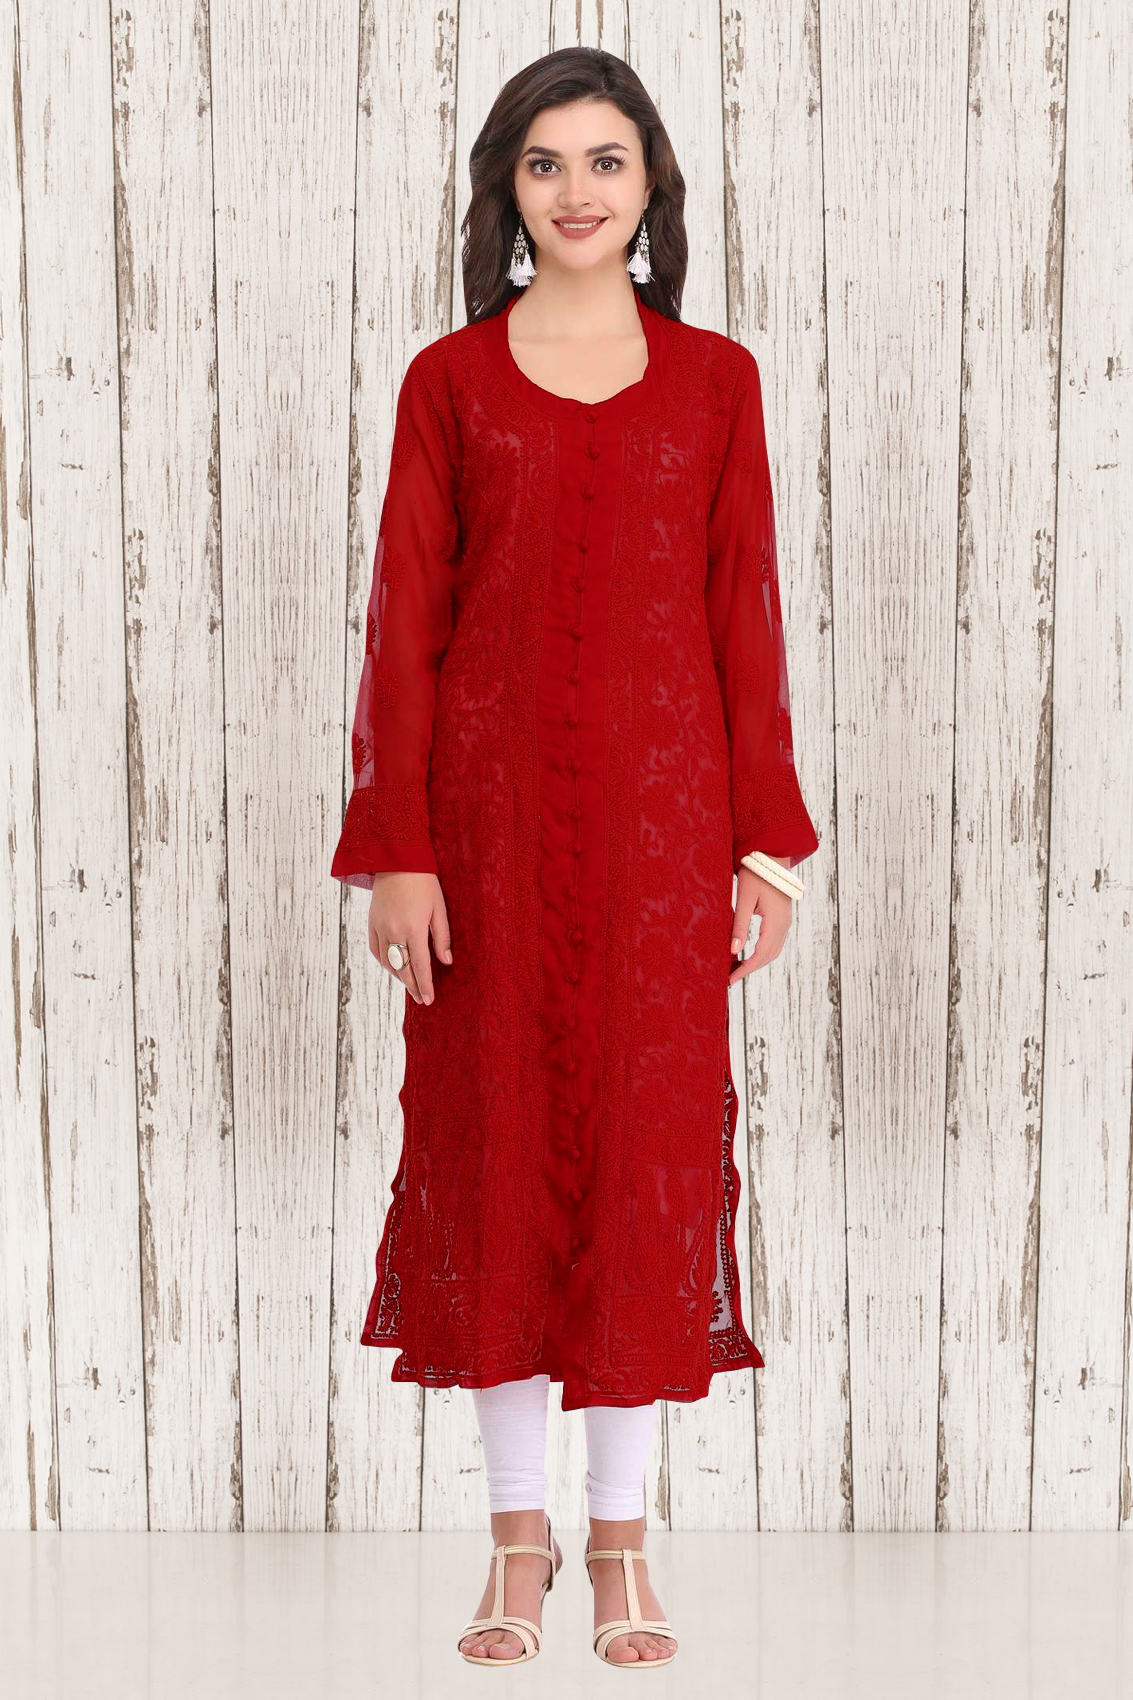 Details about  / Red Women Cotton Embroidered Chikan Handmade Kurti Ethnic Casual Wear Kurta Top